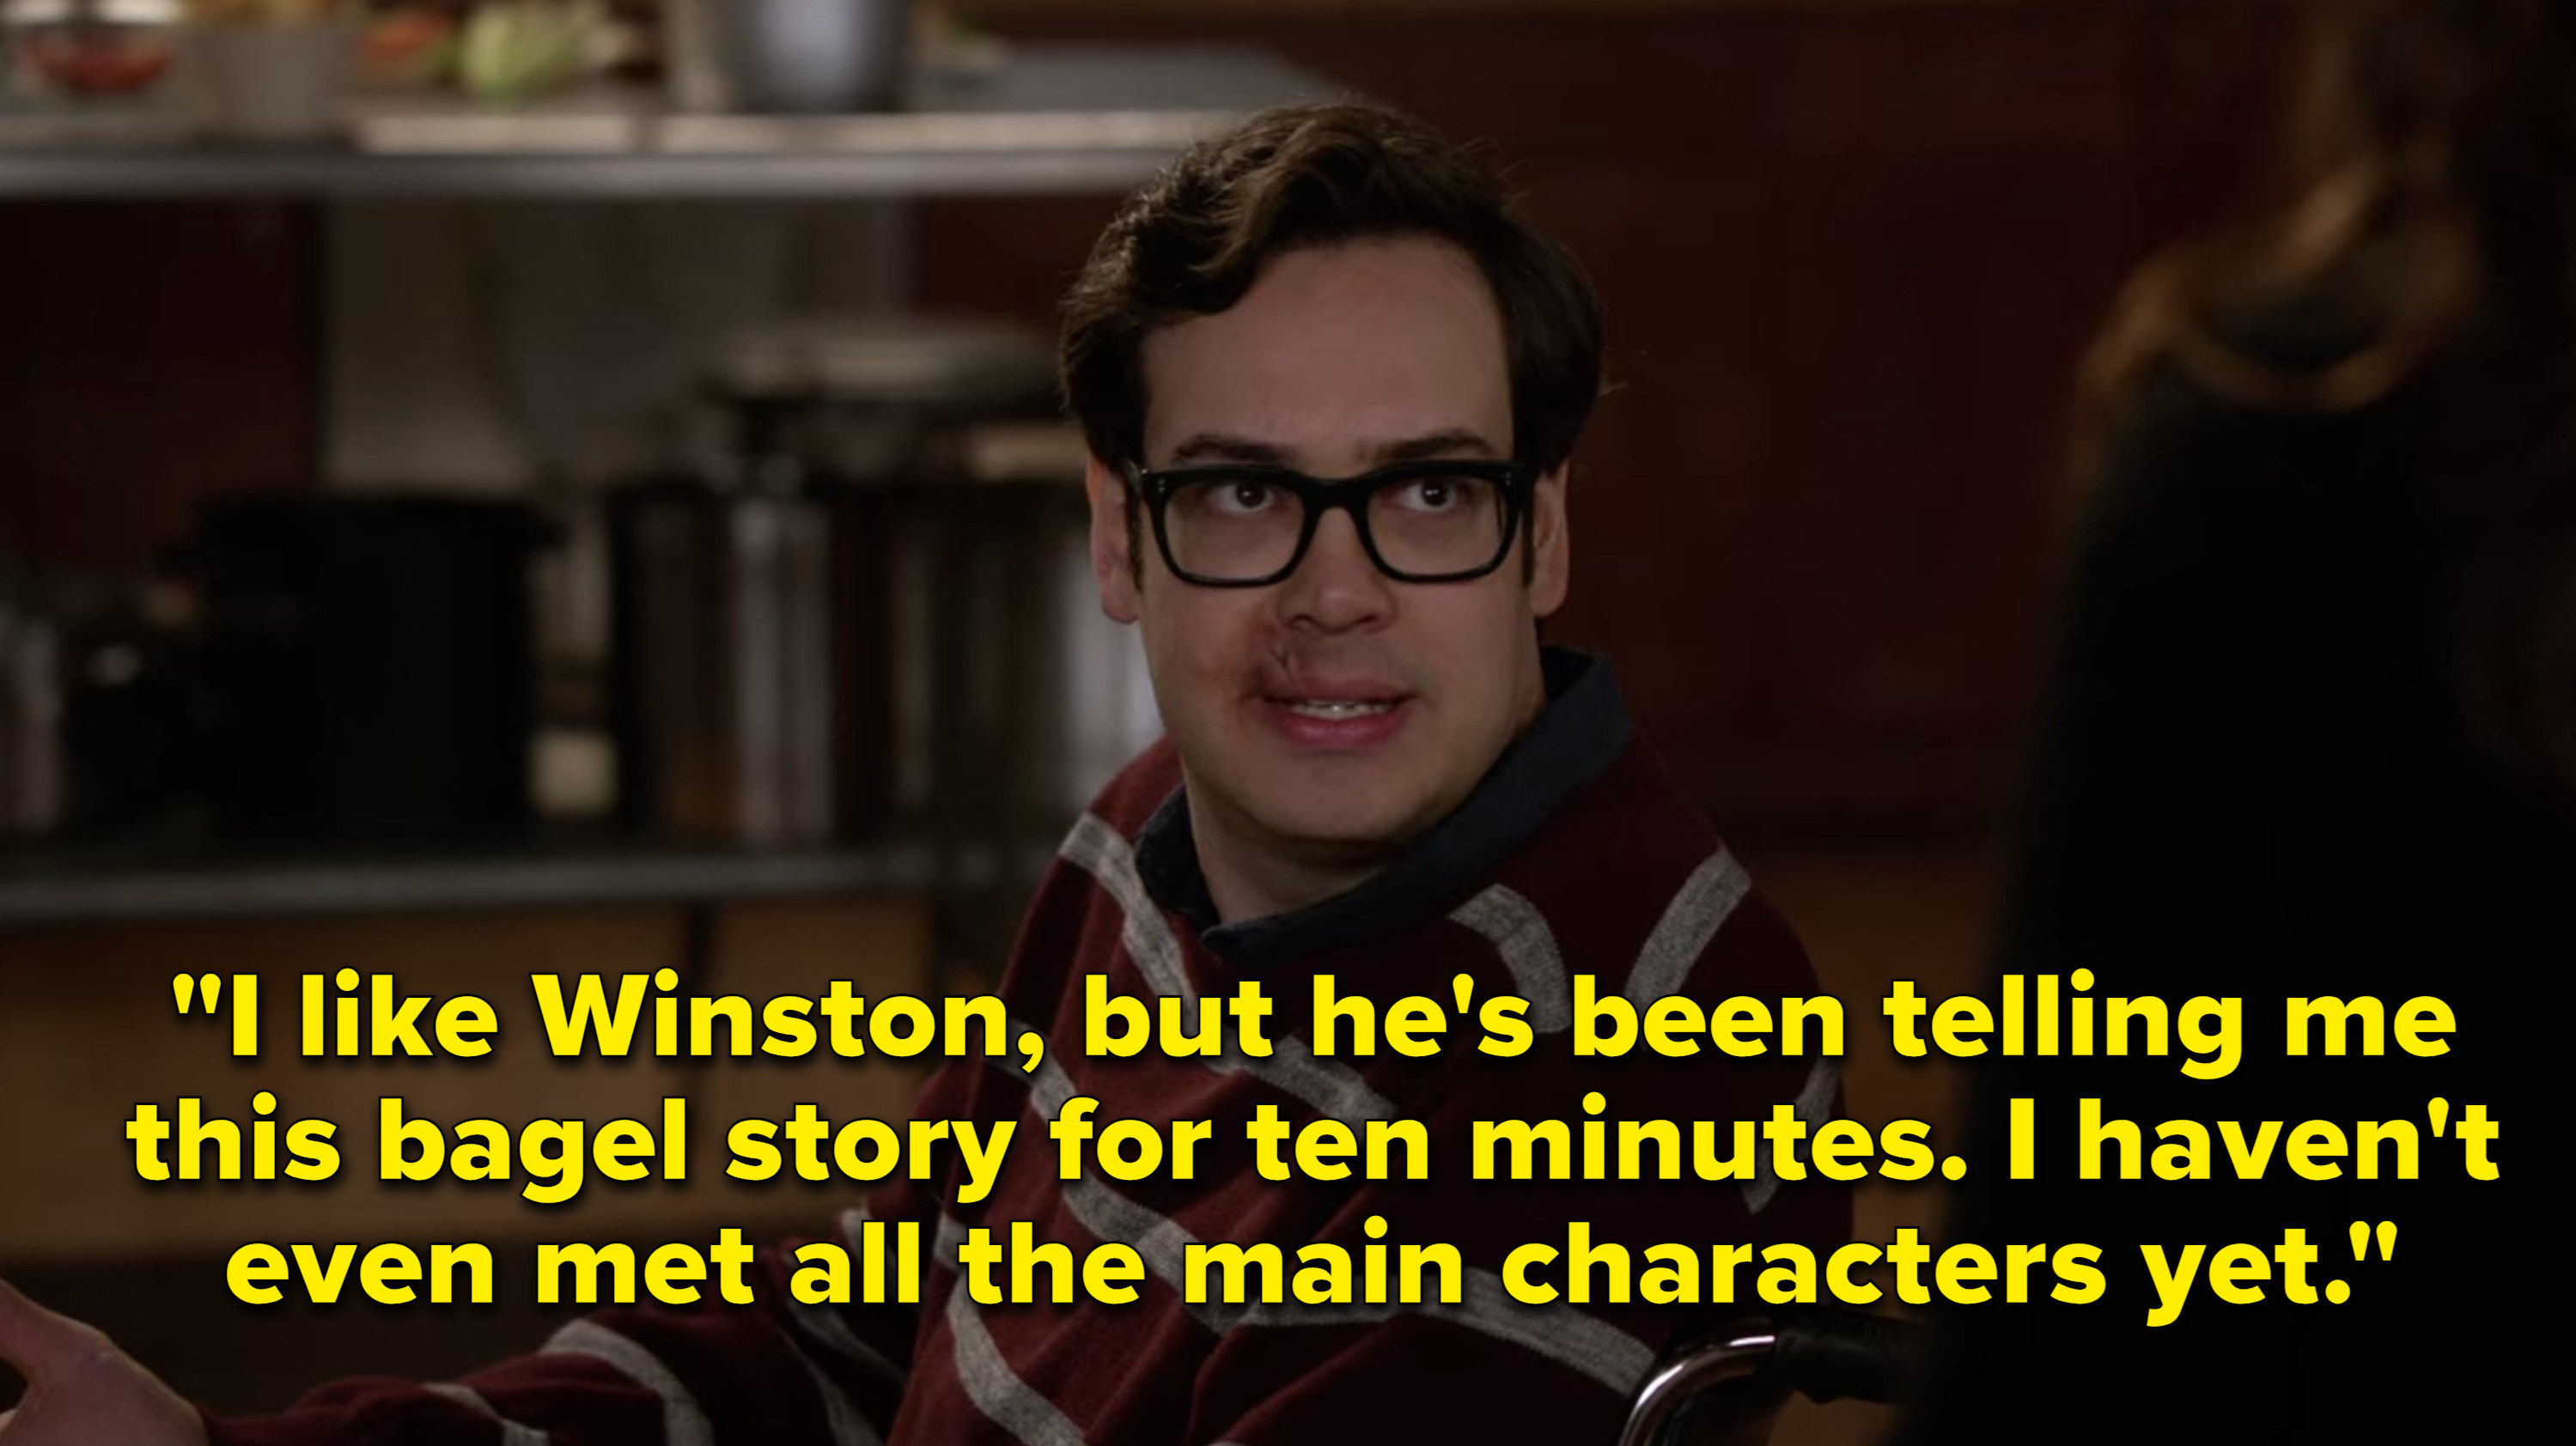 Robby says, I like Winston, but he has been telling me this bagel story for ten minutes, I havent even met all the main characters yet